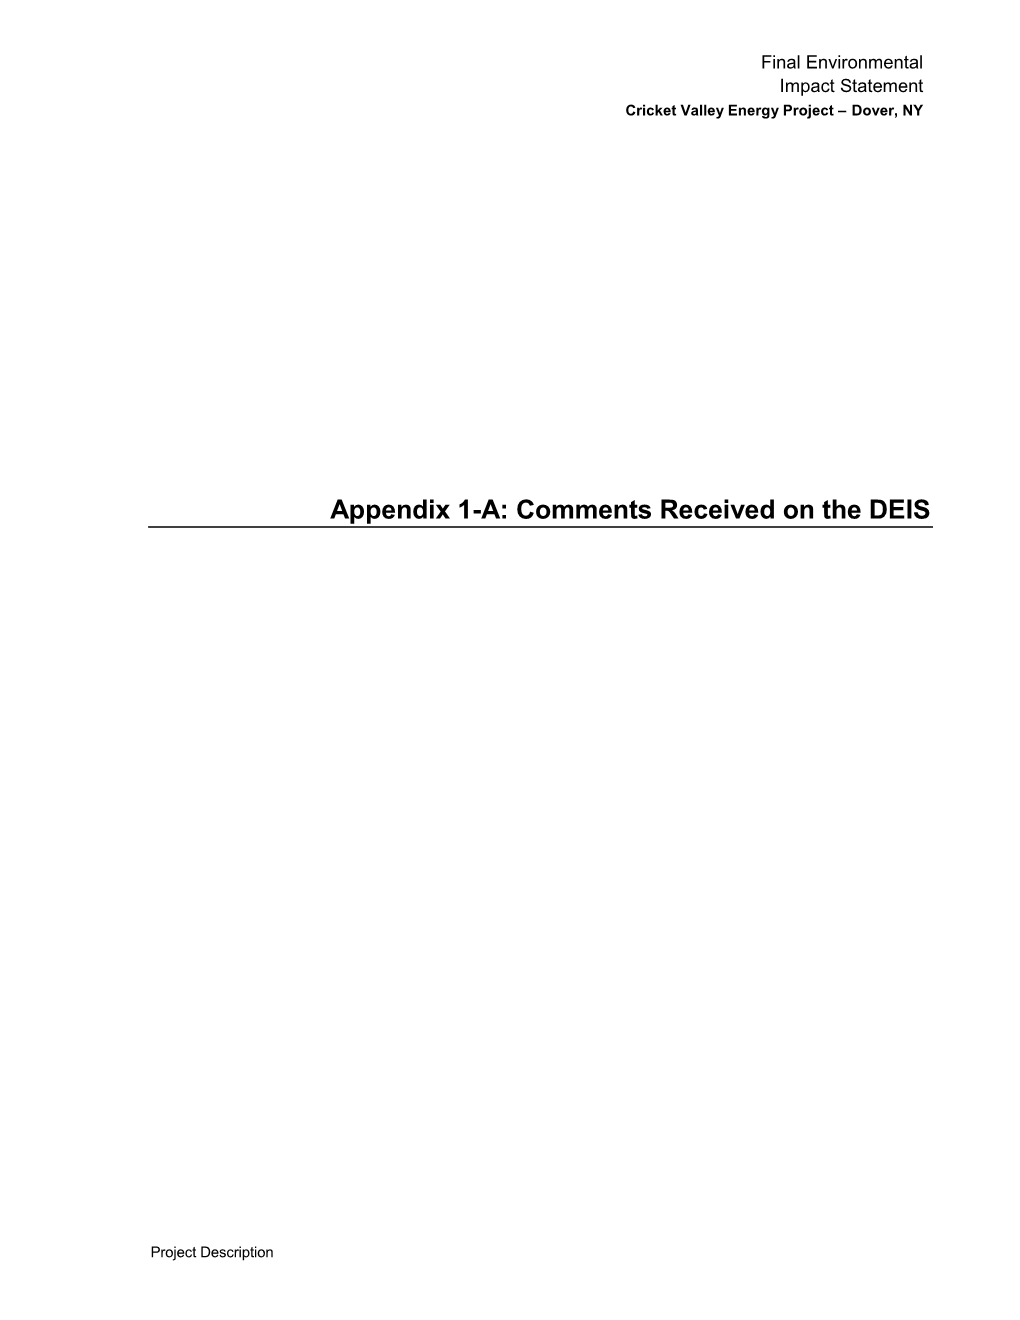 Appendix 1-A: Comments Received on the DEIS